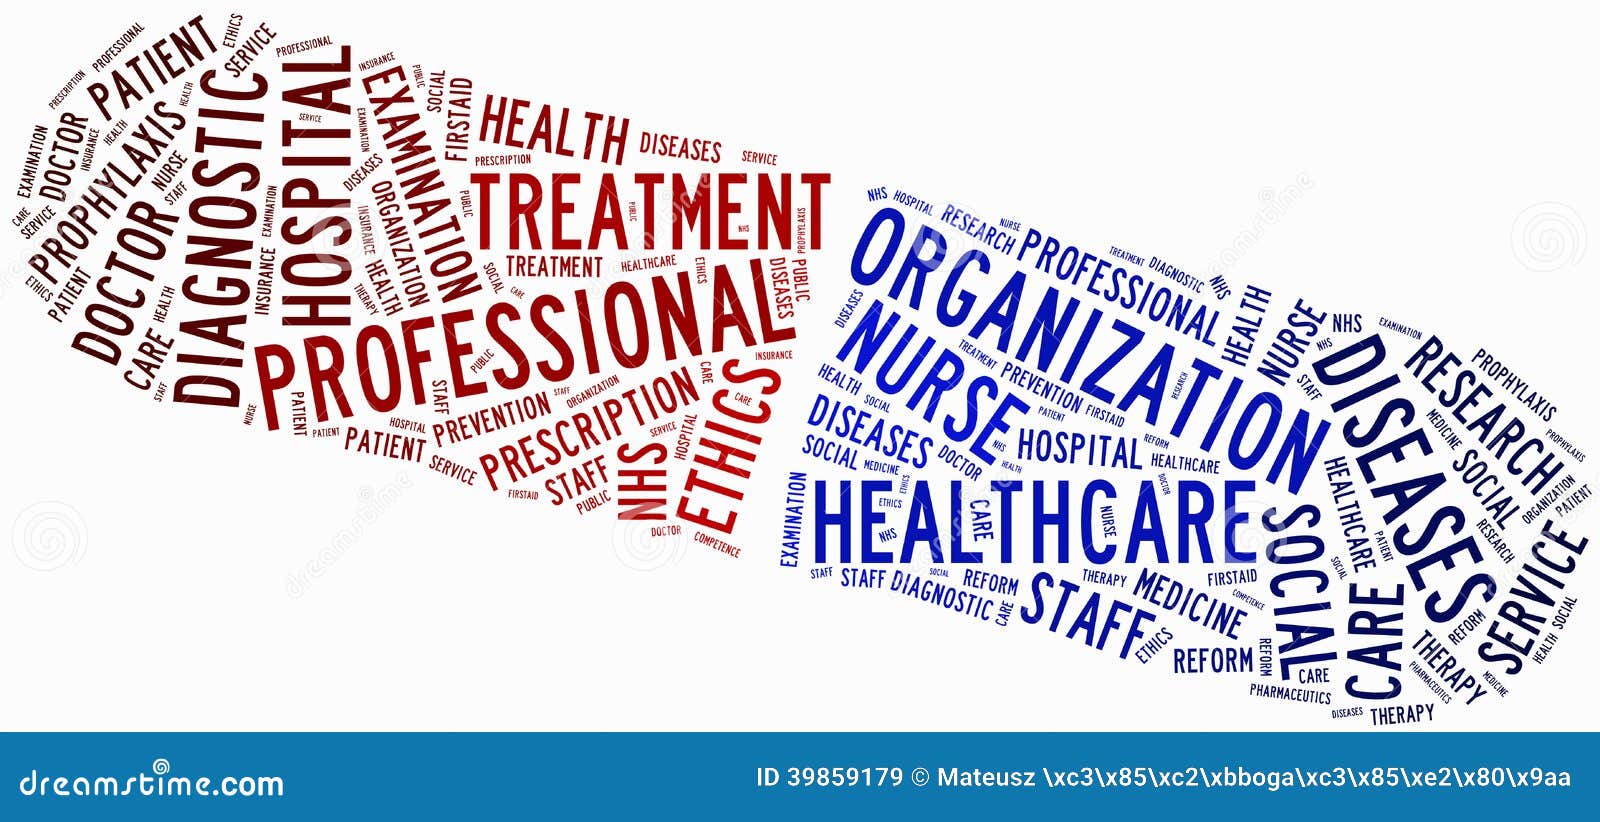 word cloud nhs or public health service related